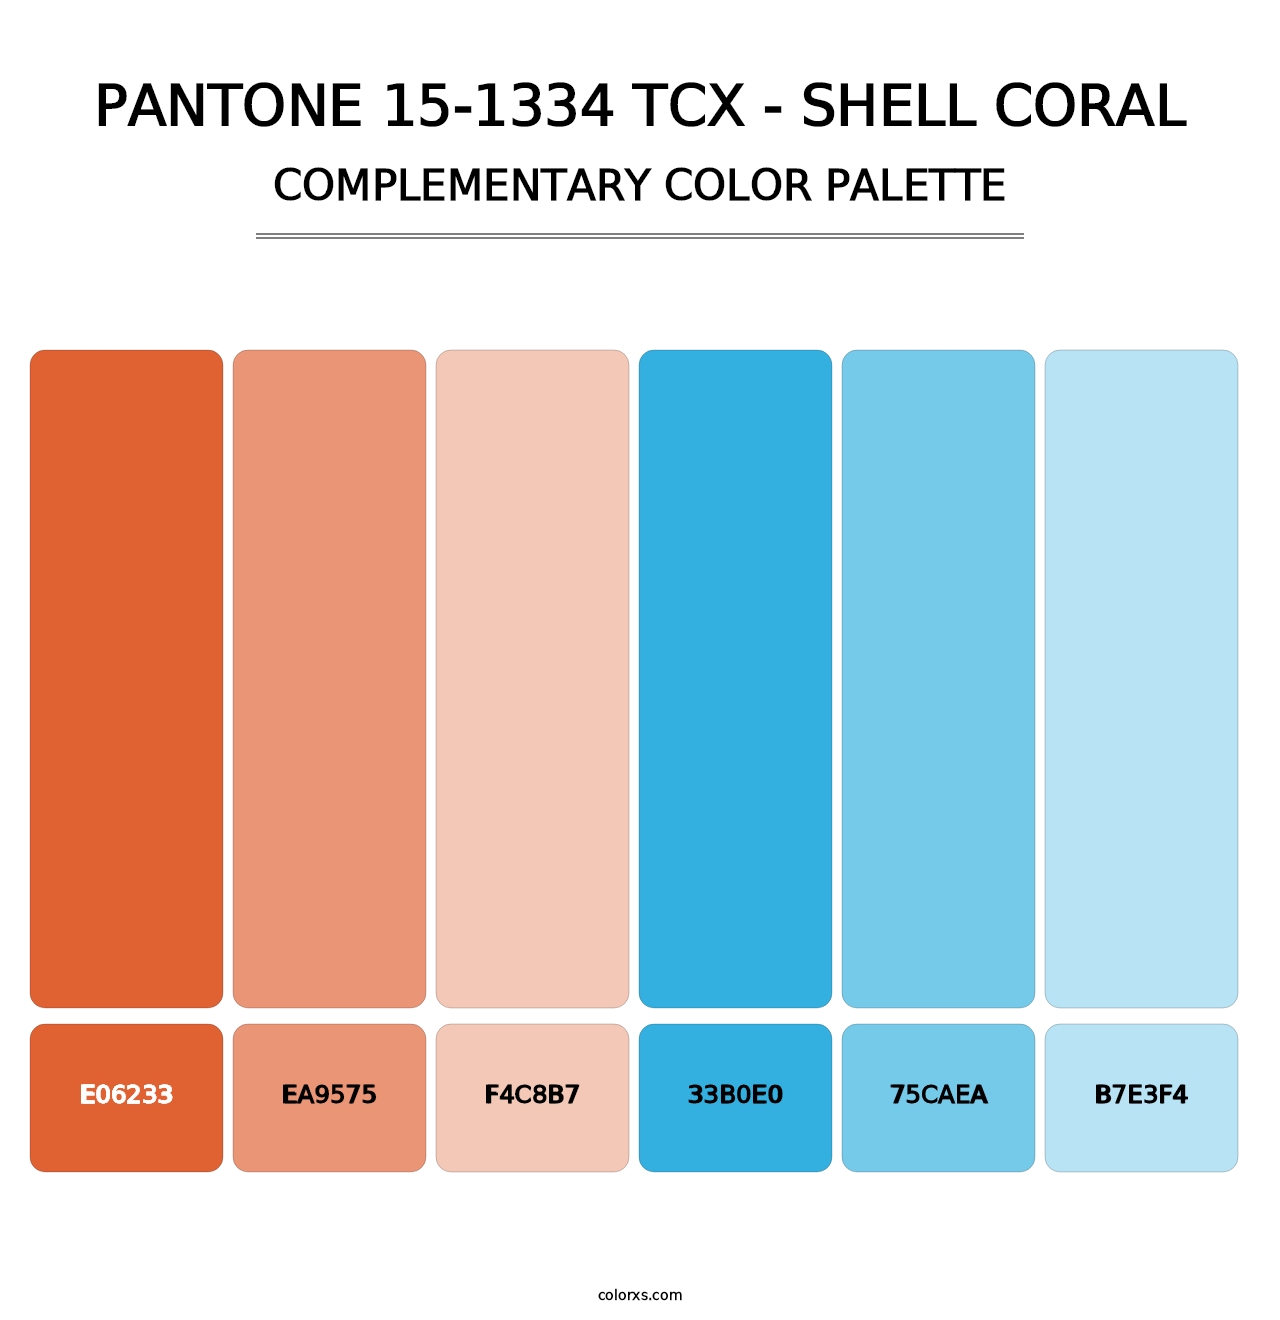 PANTONE 15-1334 TCX - Shell Coral - Complementary Color Palette